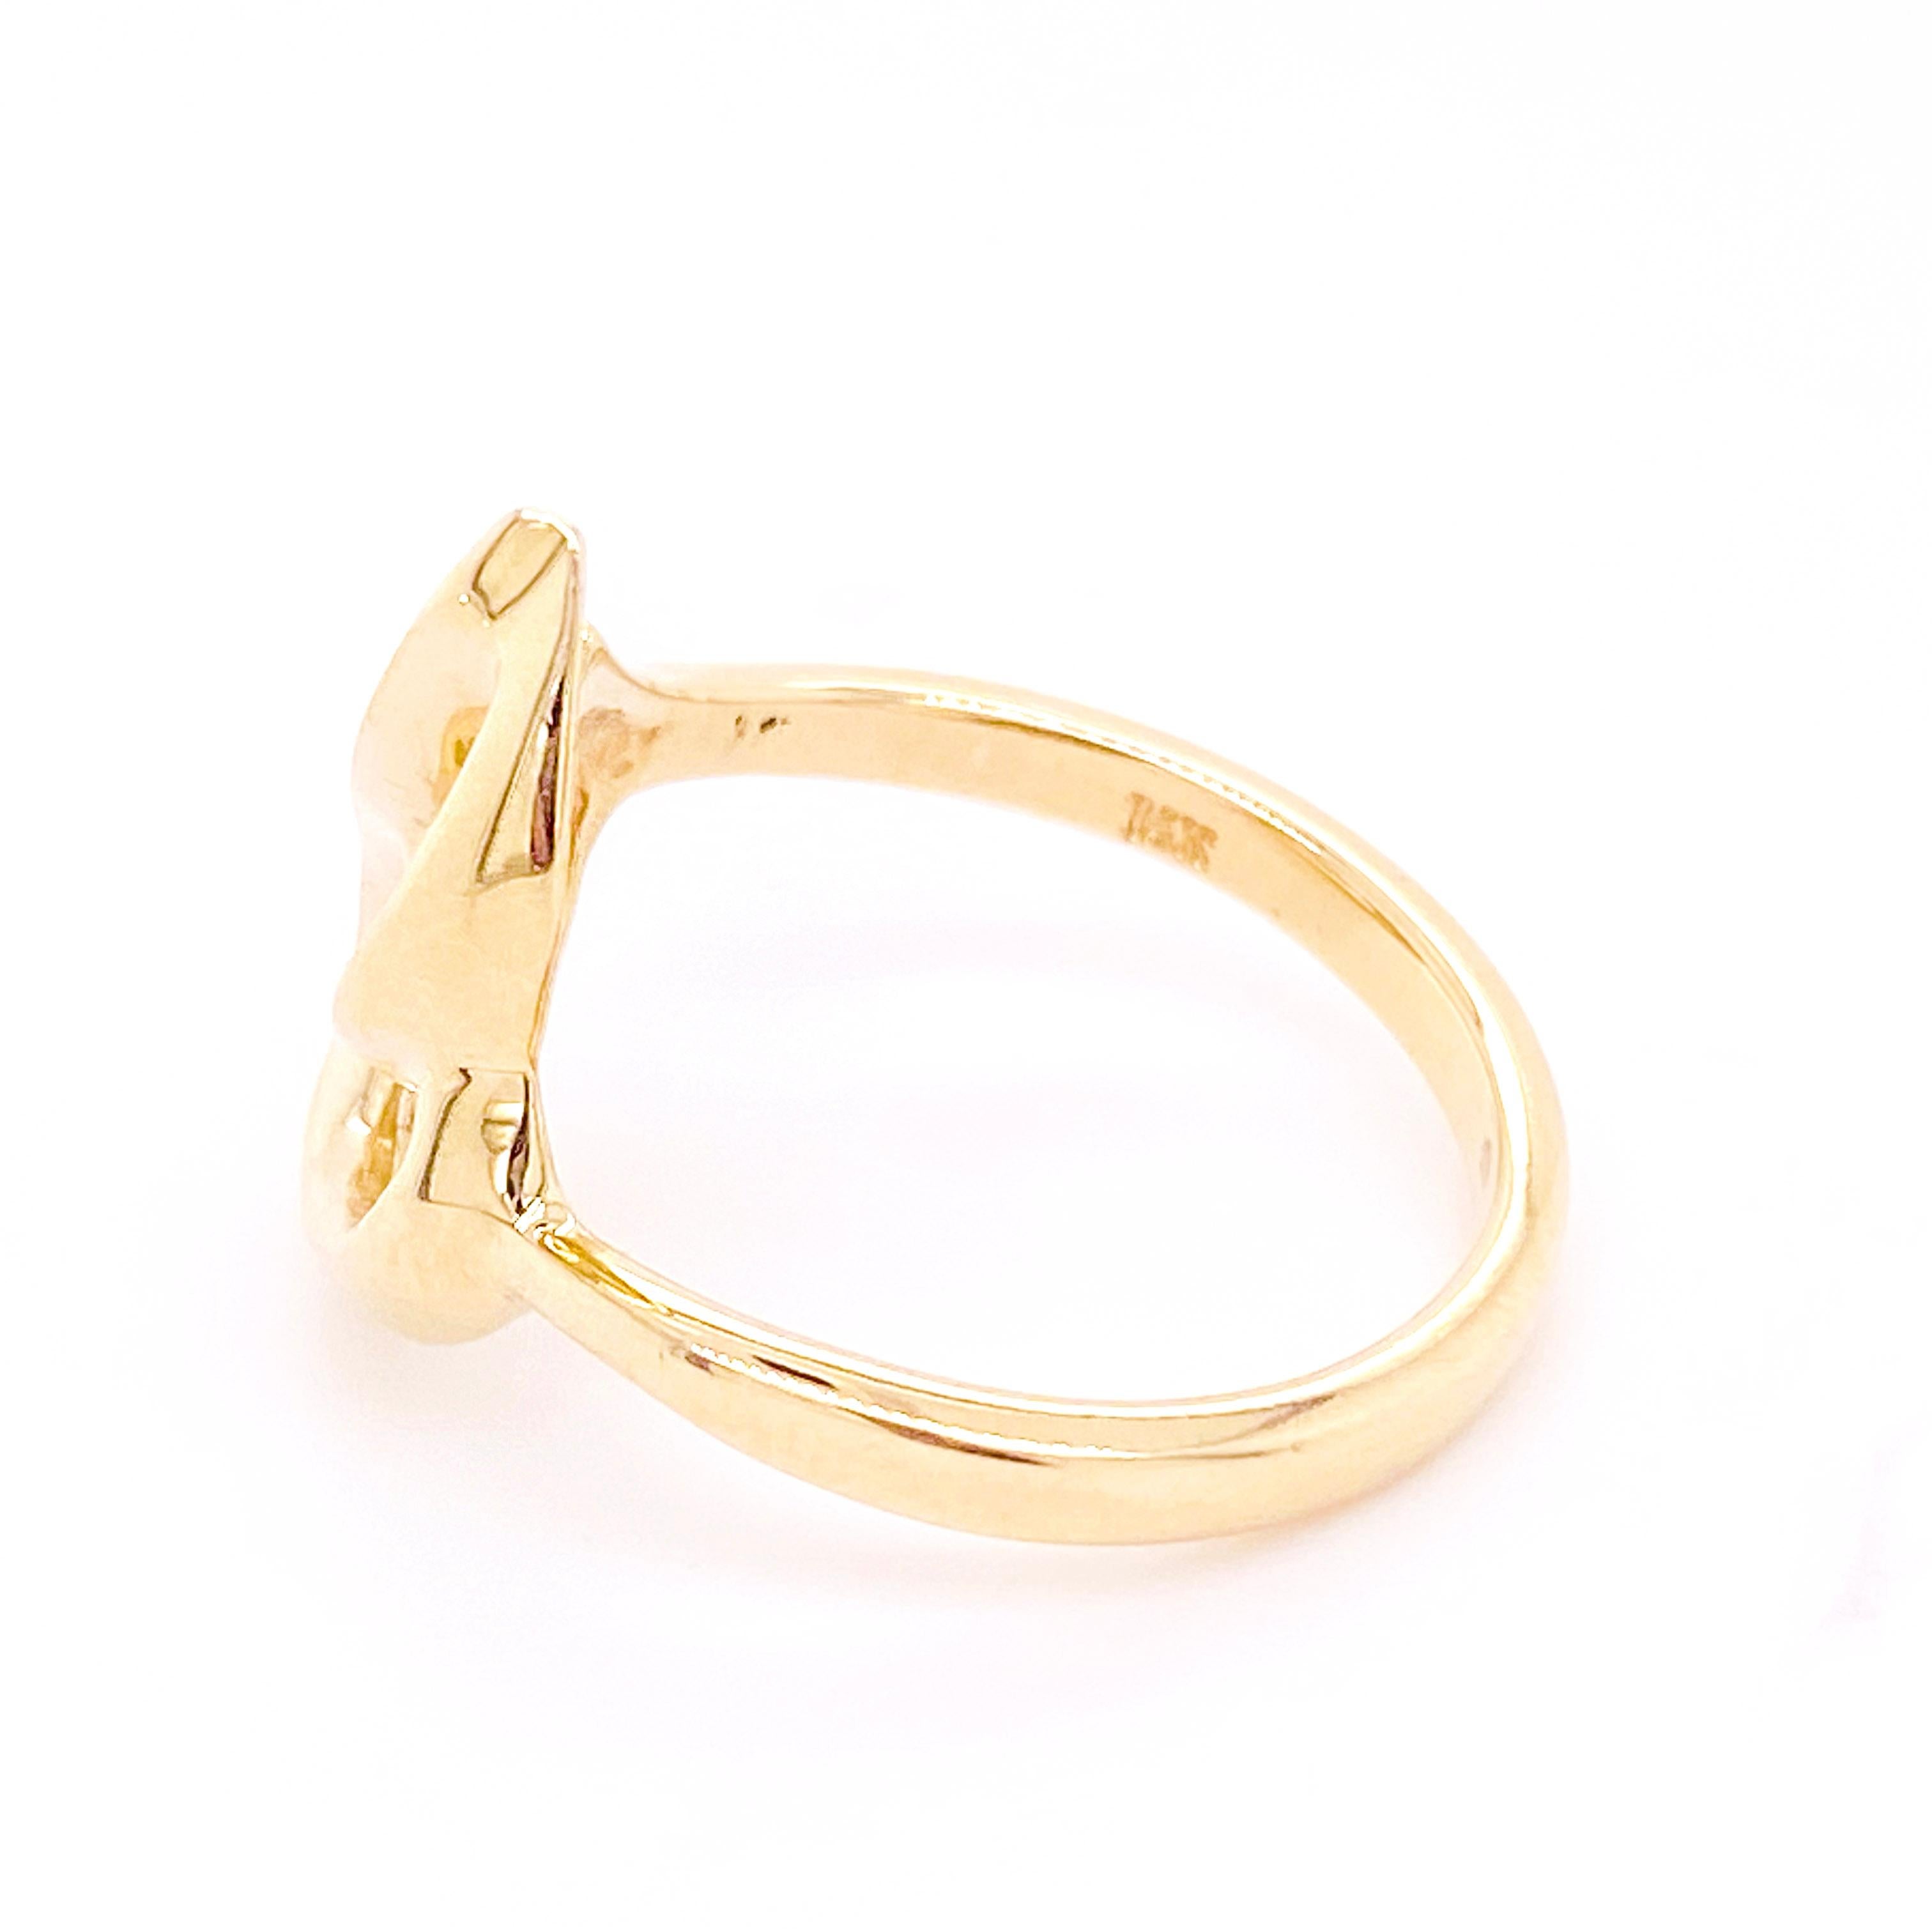 The Five Star Jewelry original free form ring is the perfect addition to any jewelry wardrobe. This ring looks great on any finger and it is so unique and one-of-a-kind. The free form design is high-polished and is as shiny as a mirror. The ring is